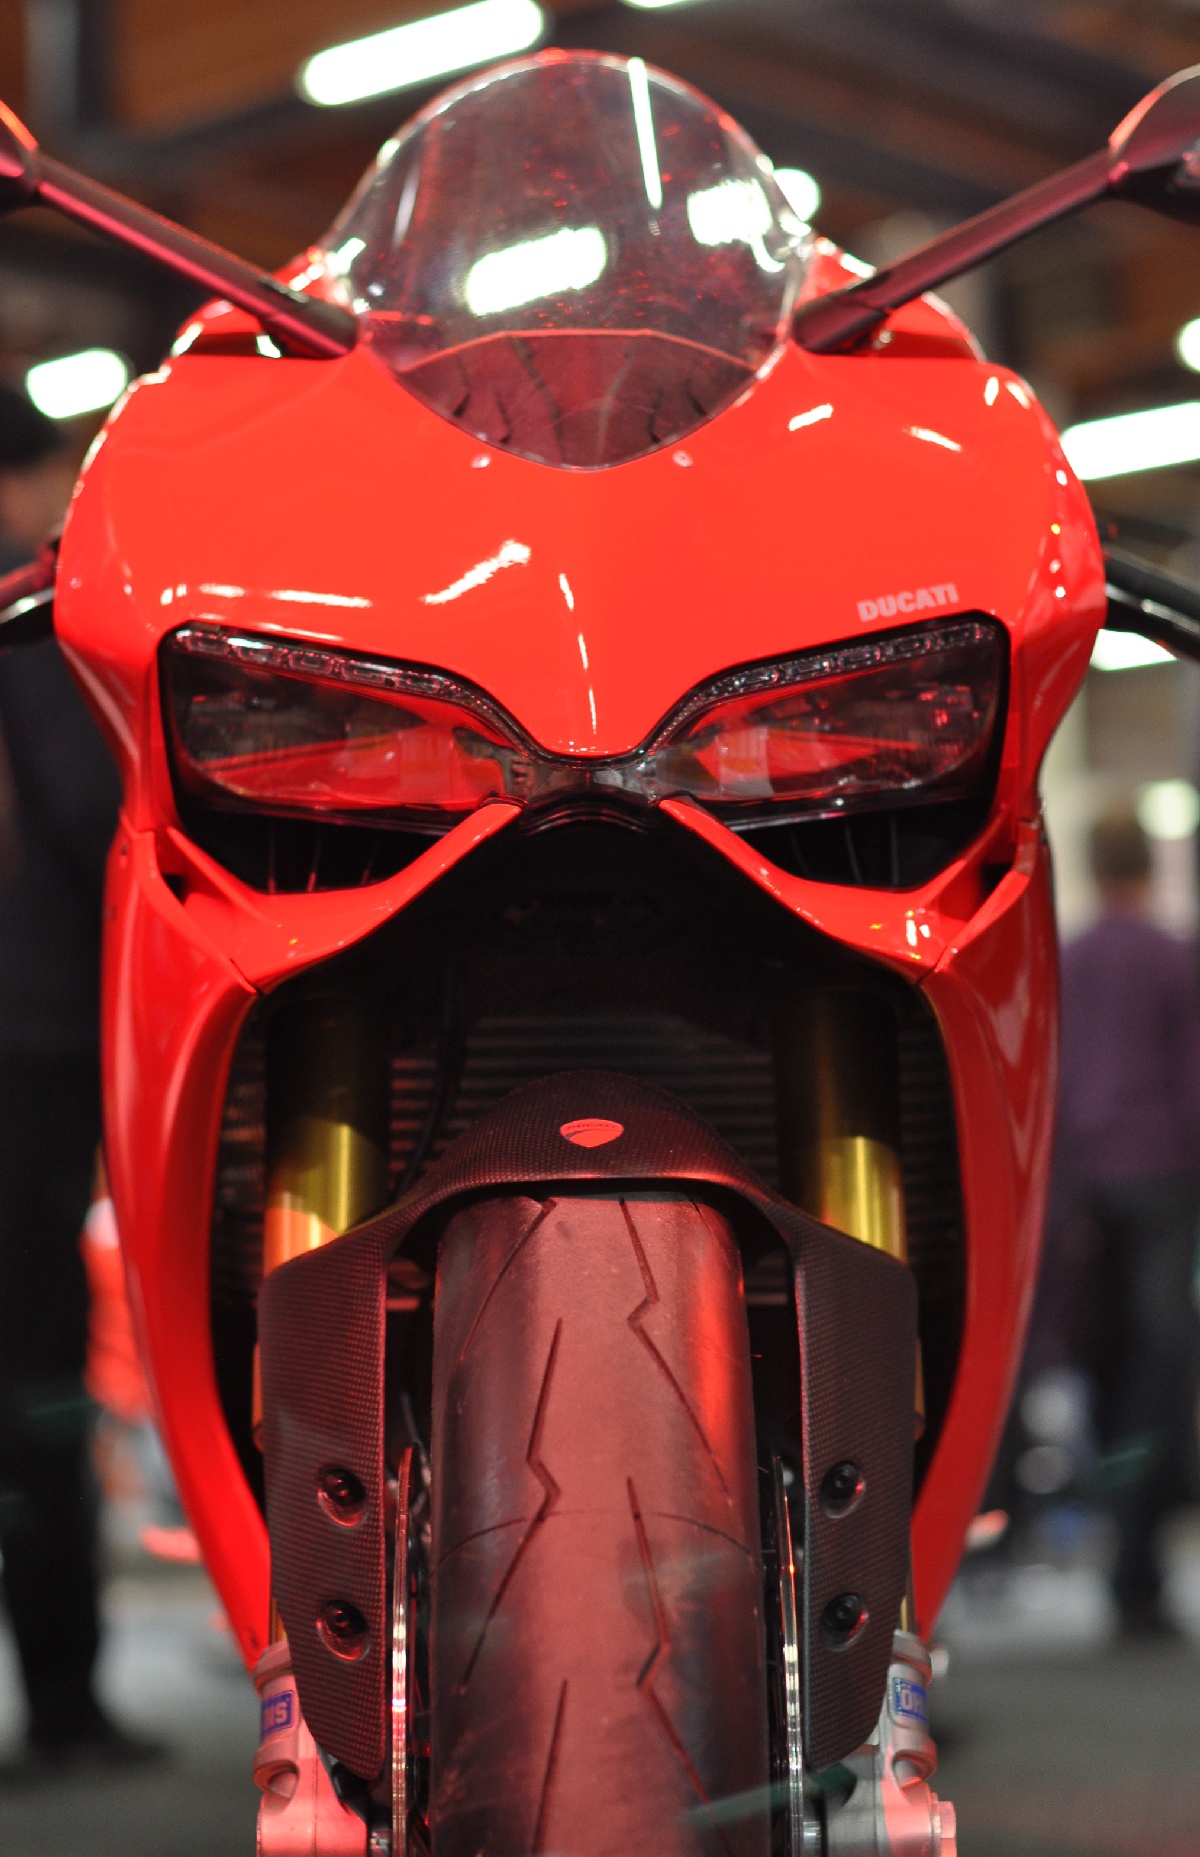 Ducati 1199 Panigale S ABS. MP 12 Motorcycle Show.